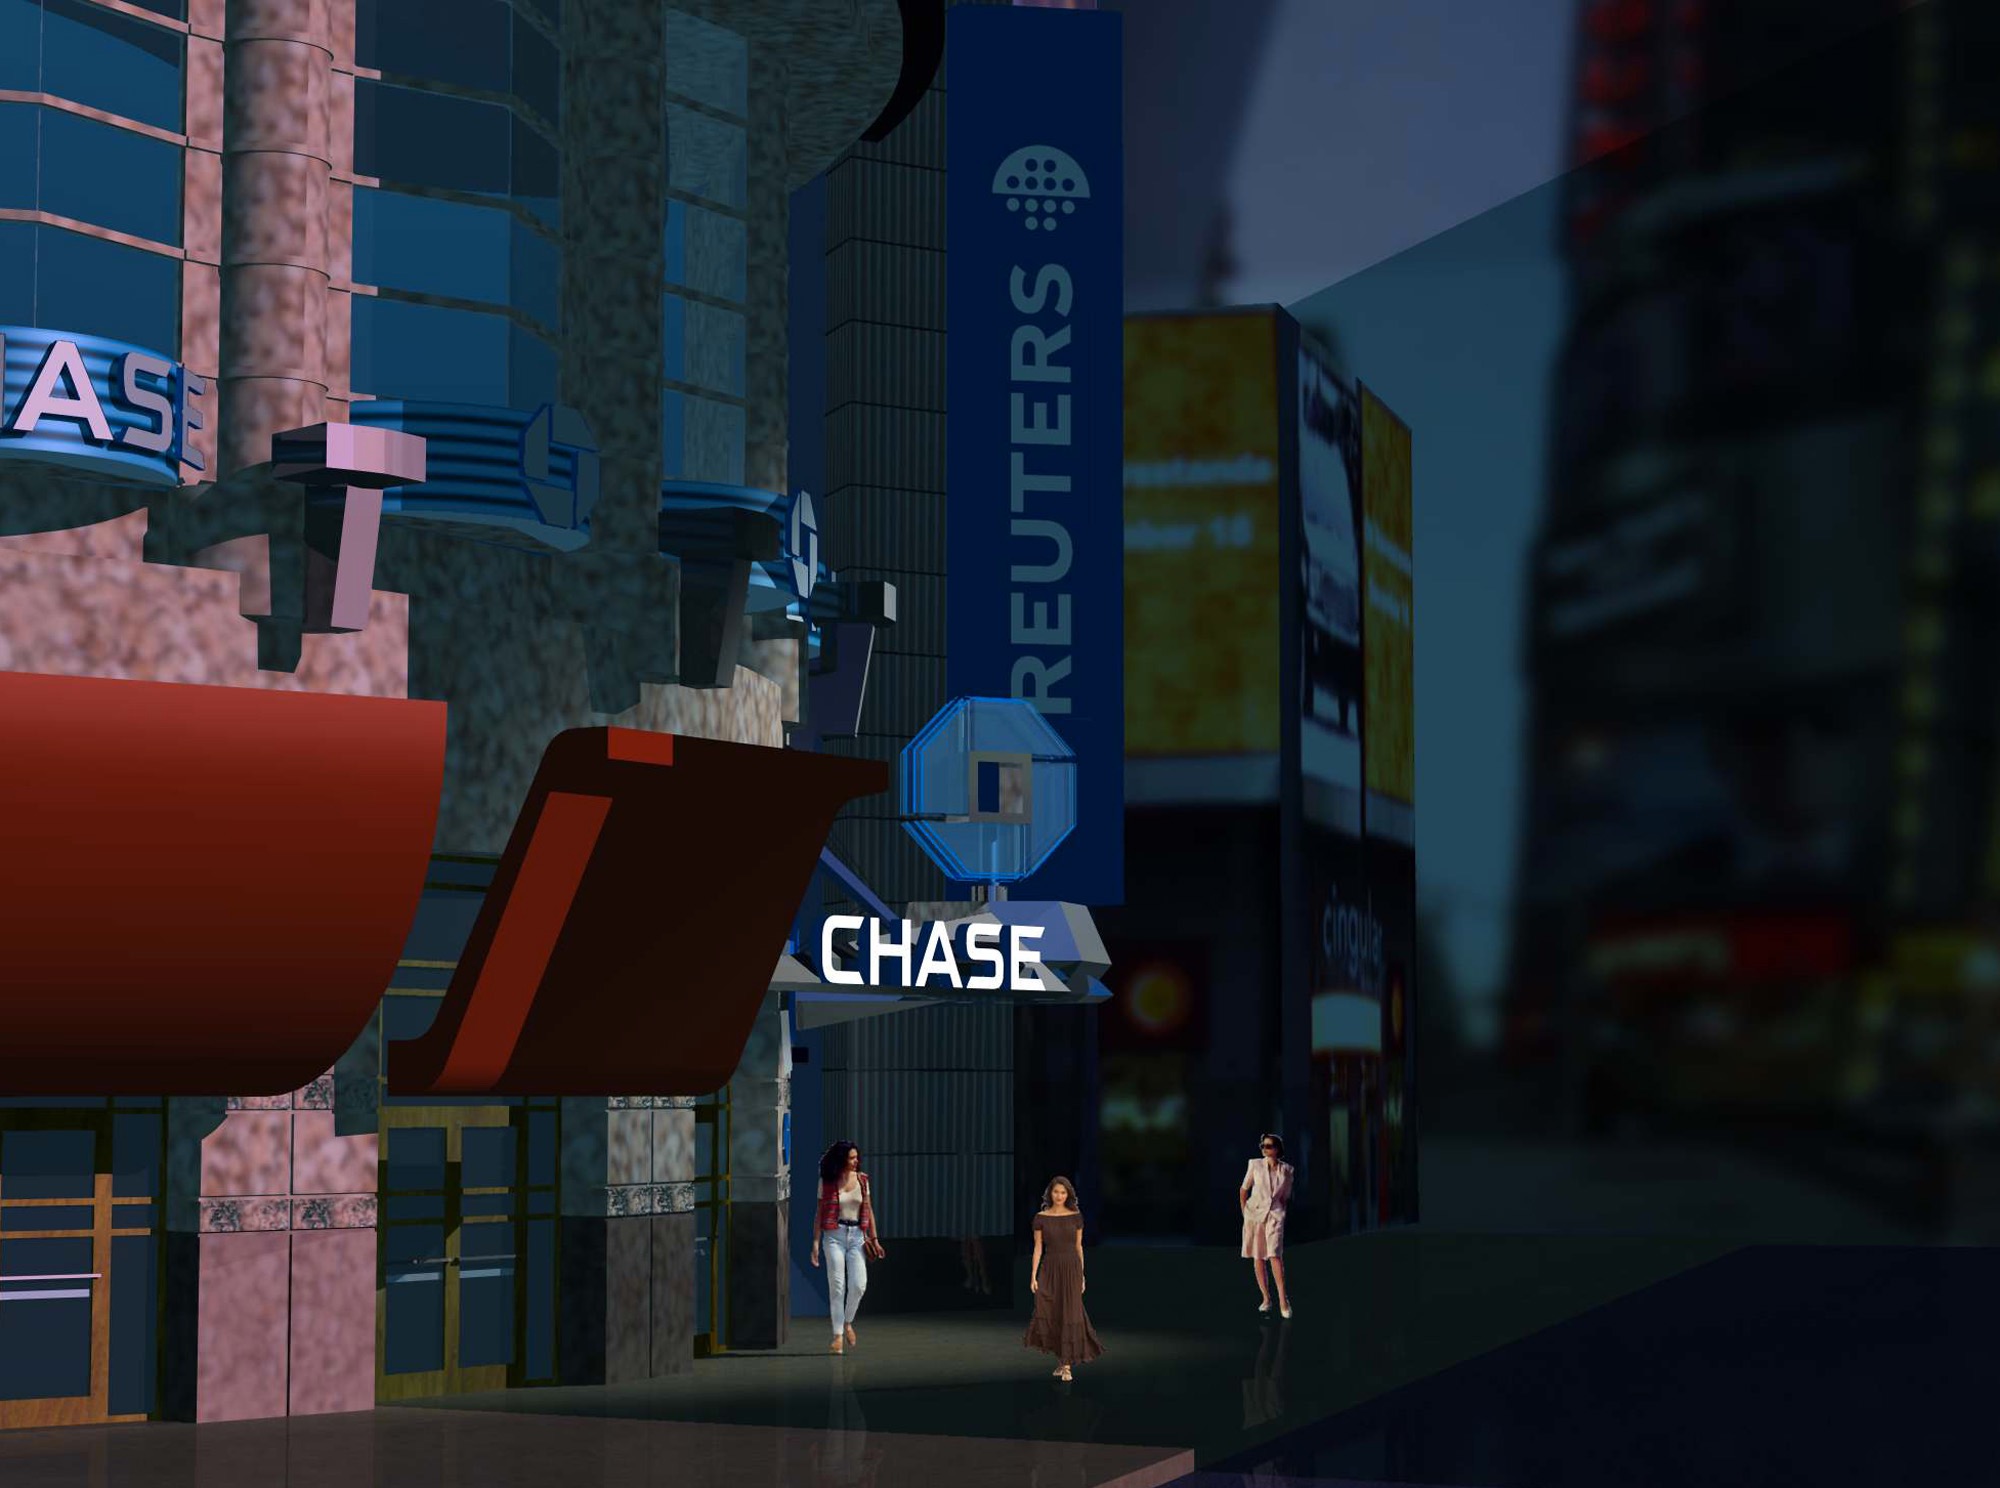 Chase Bank Flagship Signage in Times Square